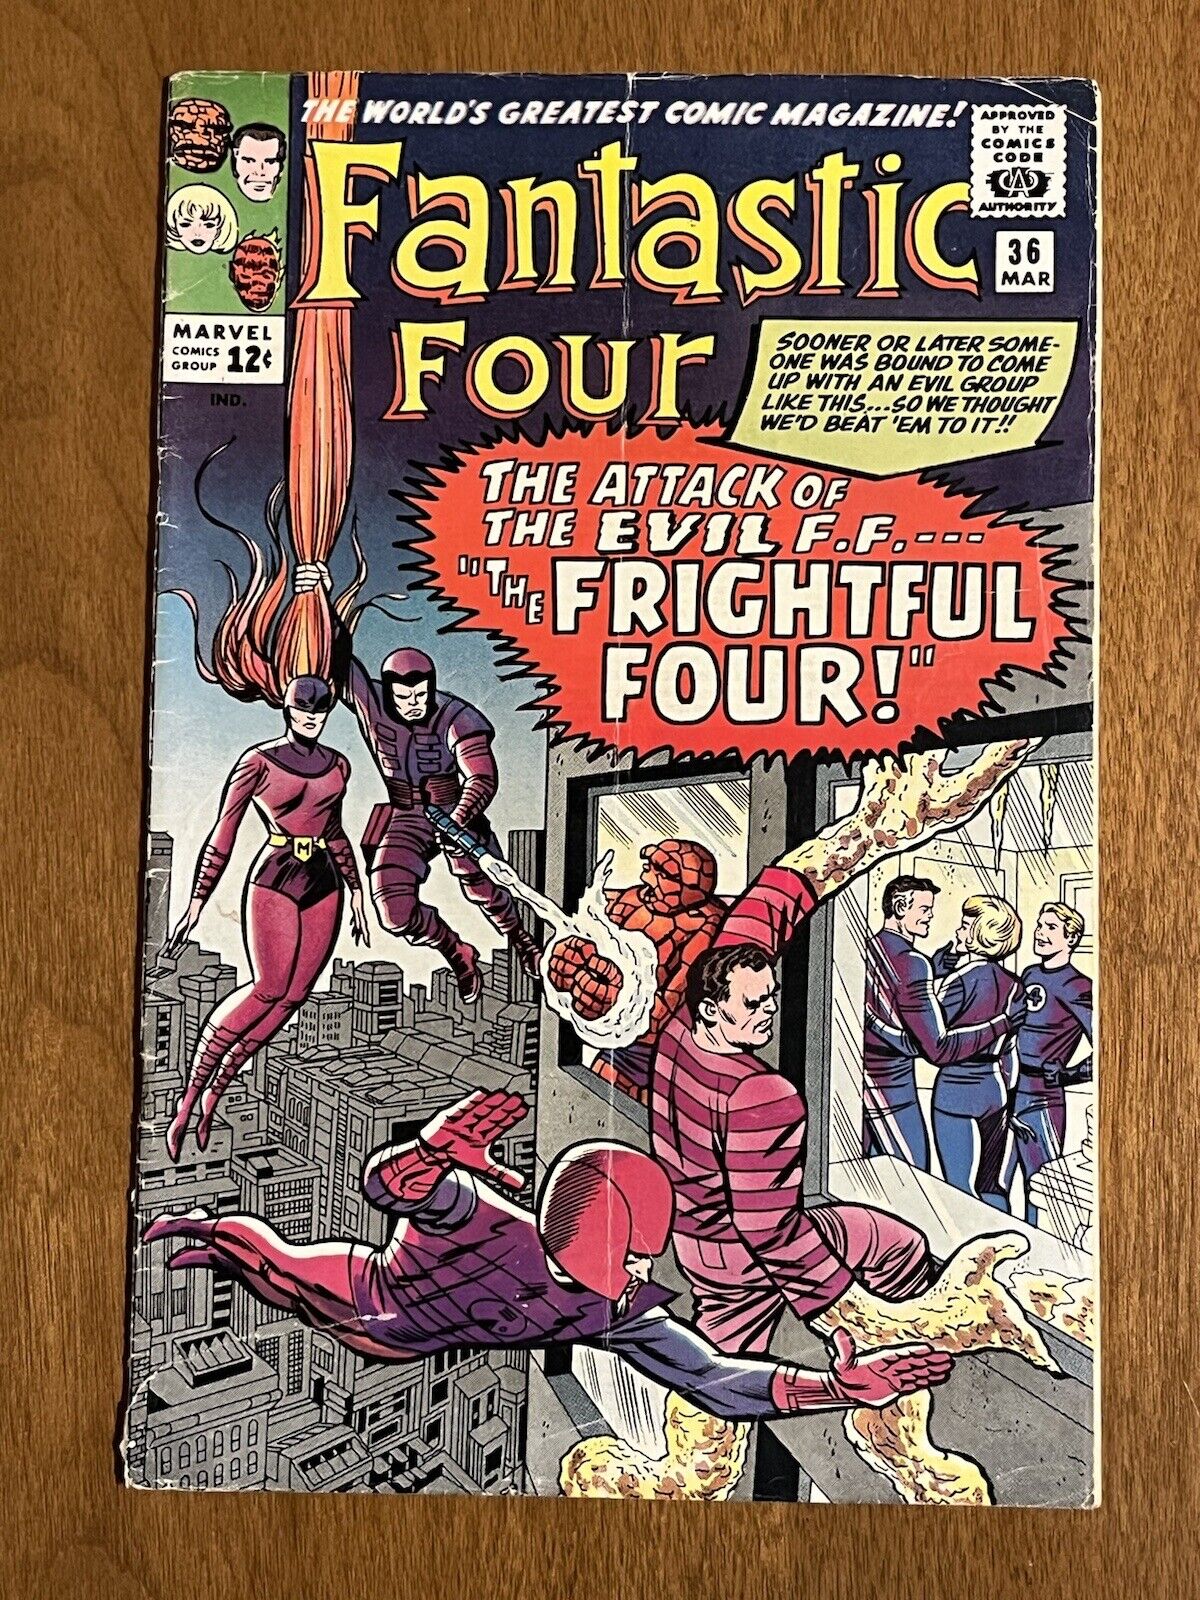 Fantastic Four #36/Silver Age Marvel Comic Book/1st Frightful Four/GD-VG